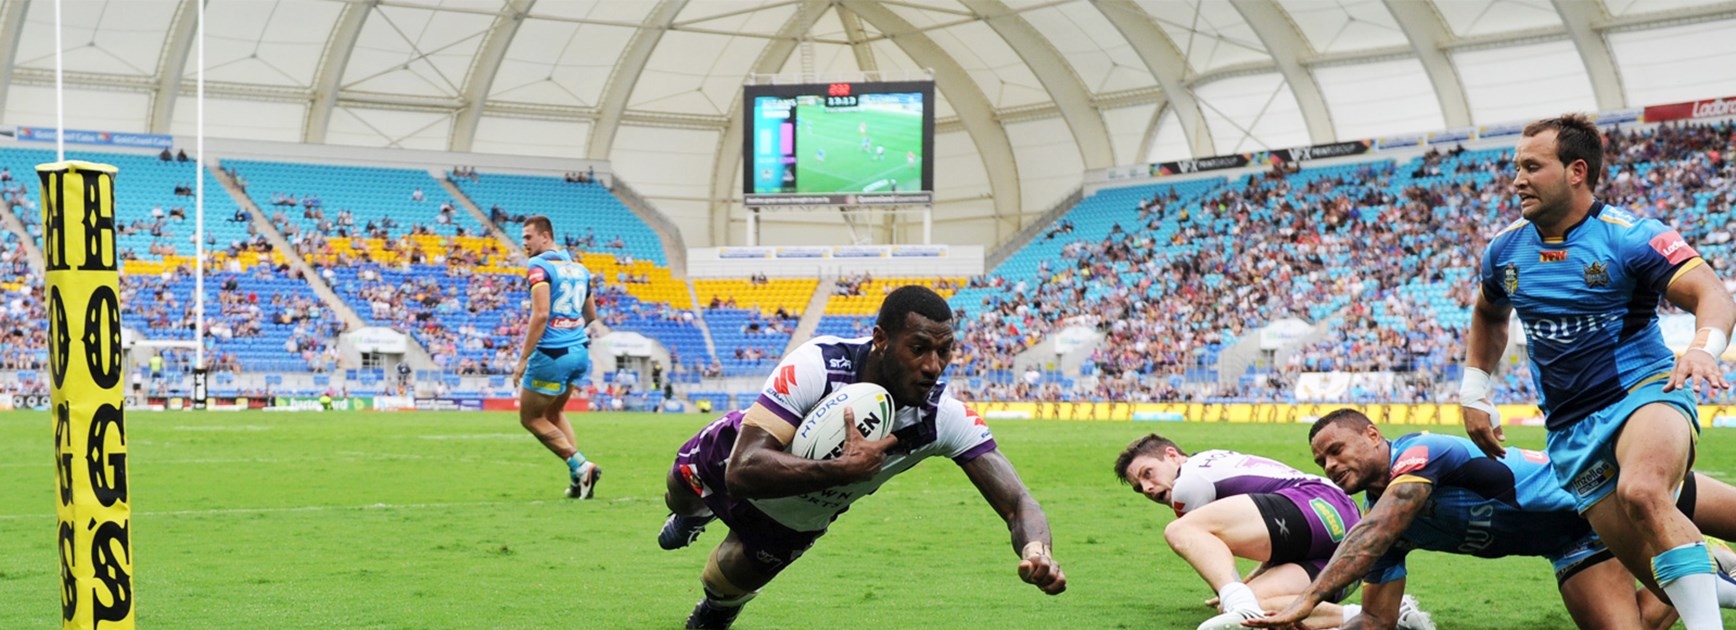 Suliasi Vunivalu continued his try-scoring start to his Melbourne Storm career against the Titans in Round 9.